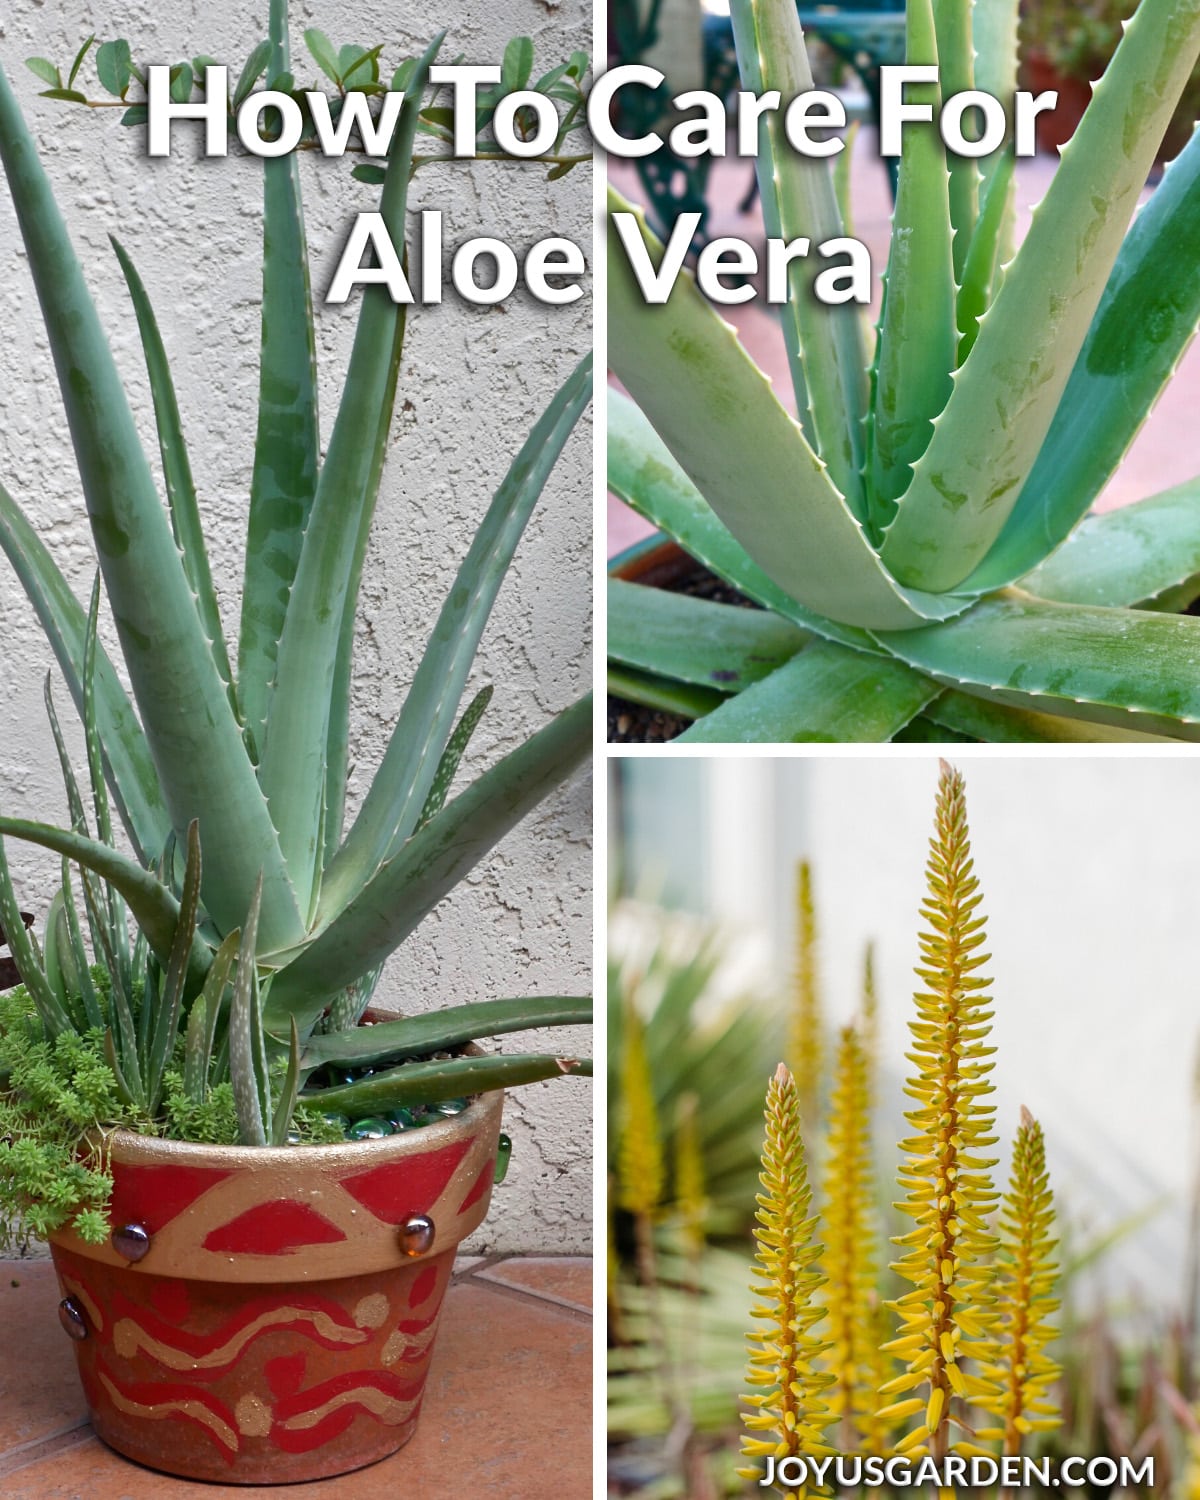 How To Care For An Aloe Vera Plant: A Plant With Purpose